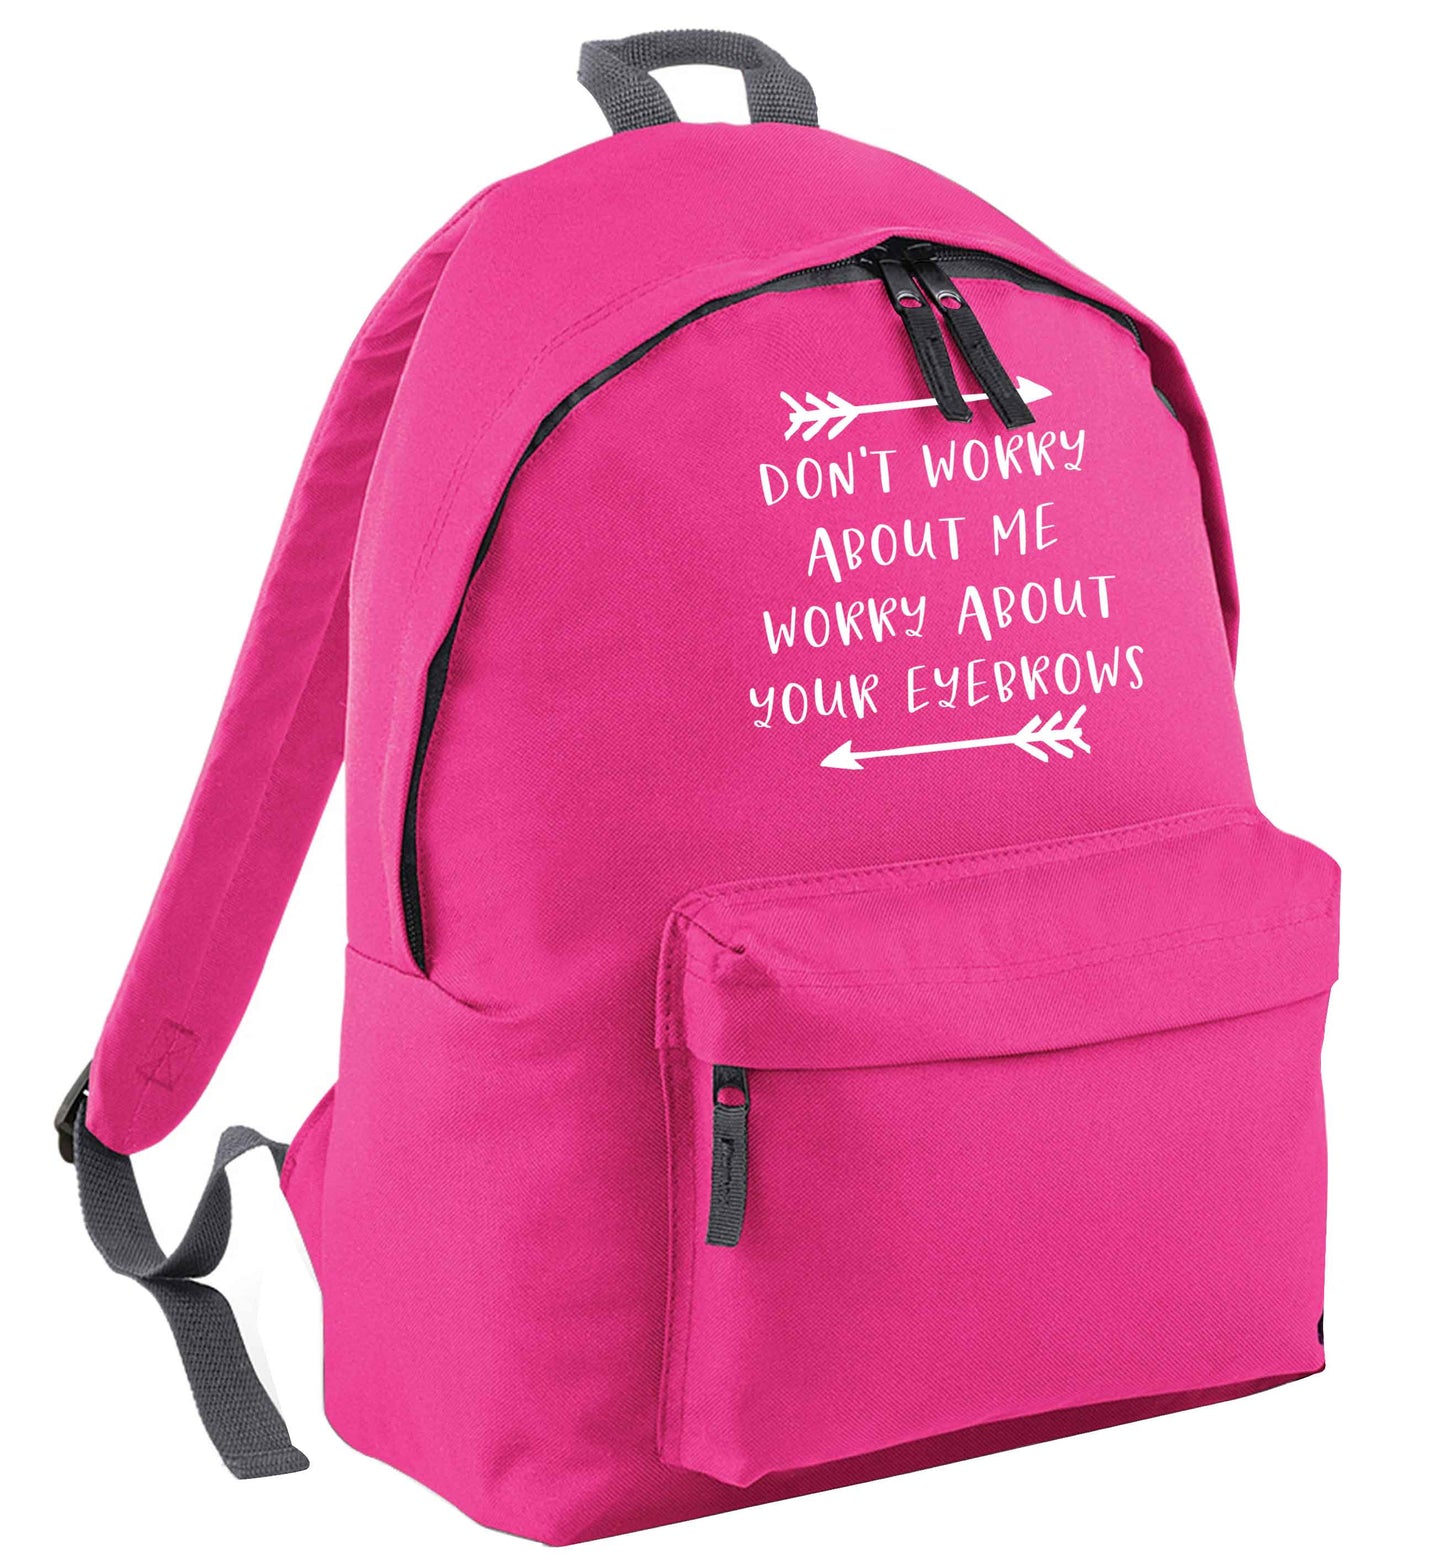 Don't worry about me worry about your eyebrows pink adults backpack